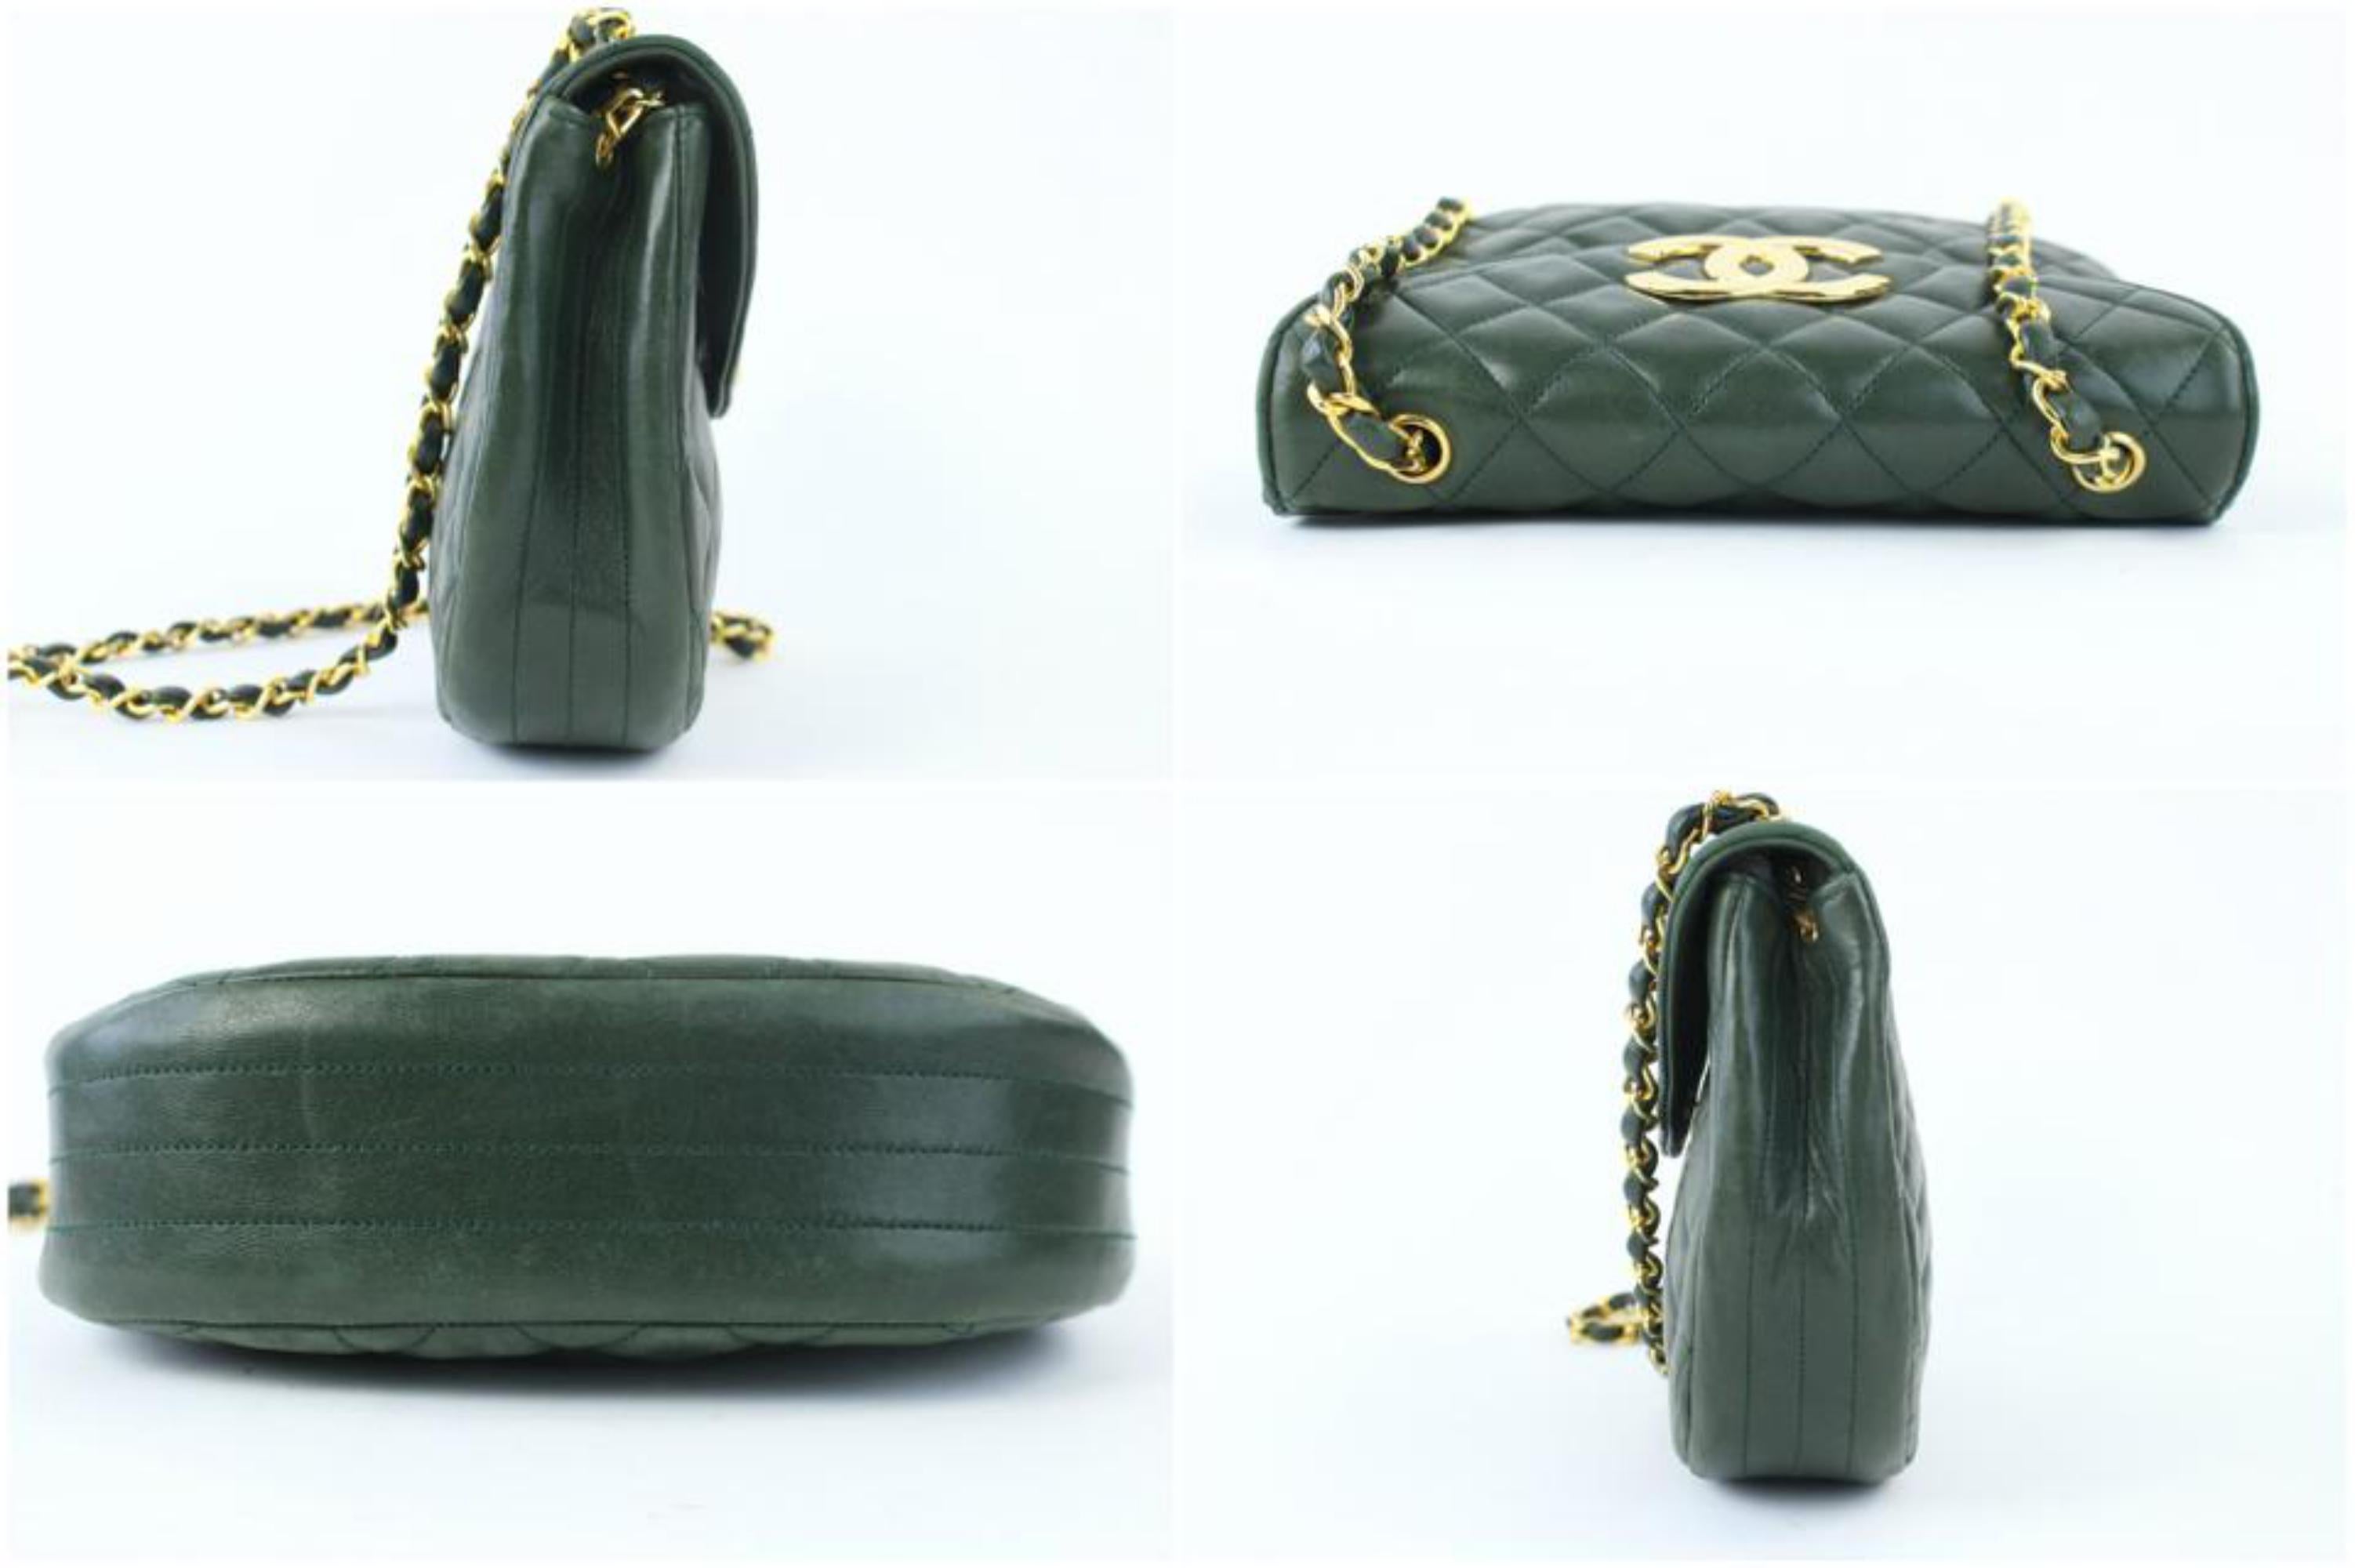 Chanel (Ultra Rare) Jumbo Logo Flap 17cz0717 Forest Green Leather Cross Body Bag In Fair Condition For Sale In Forest Hills, NY